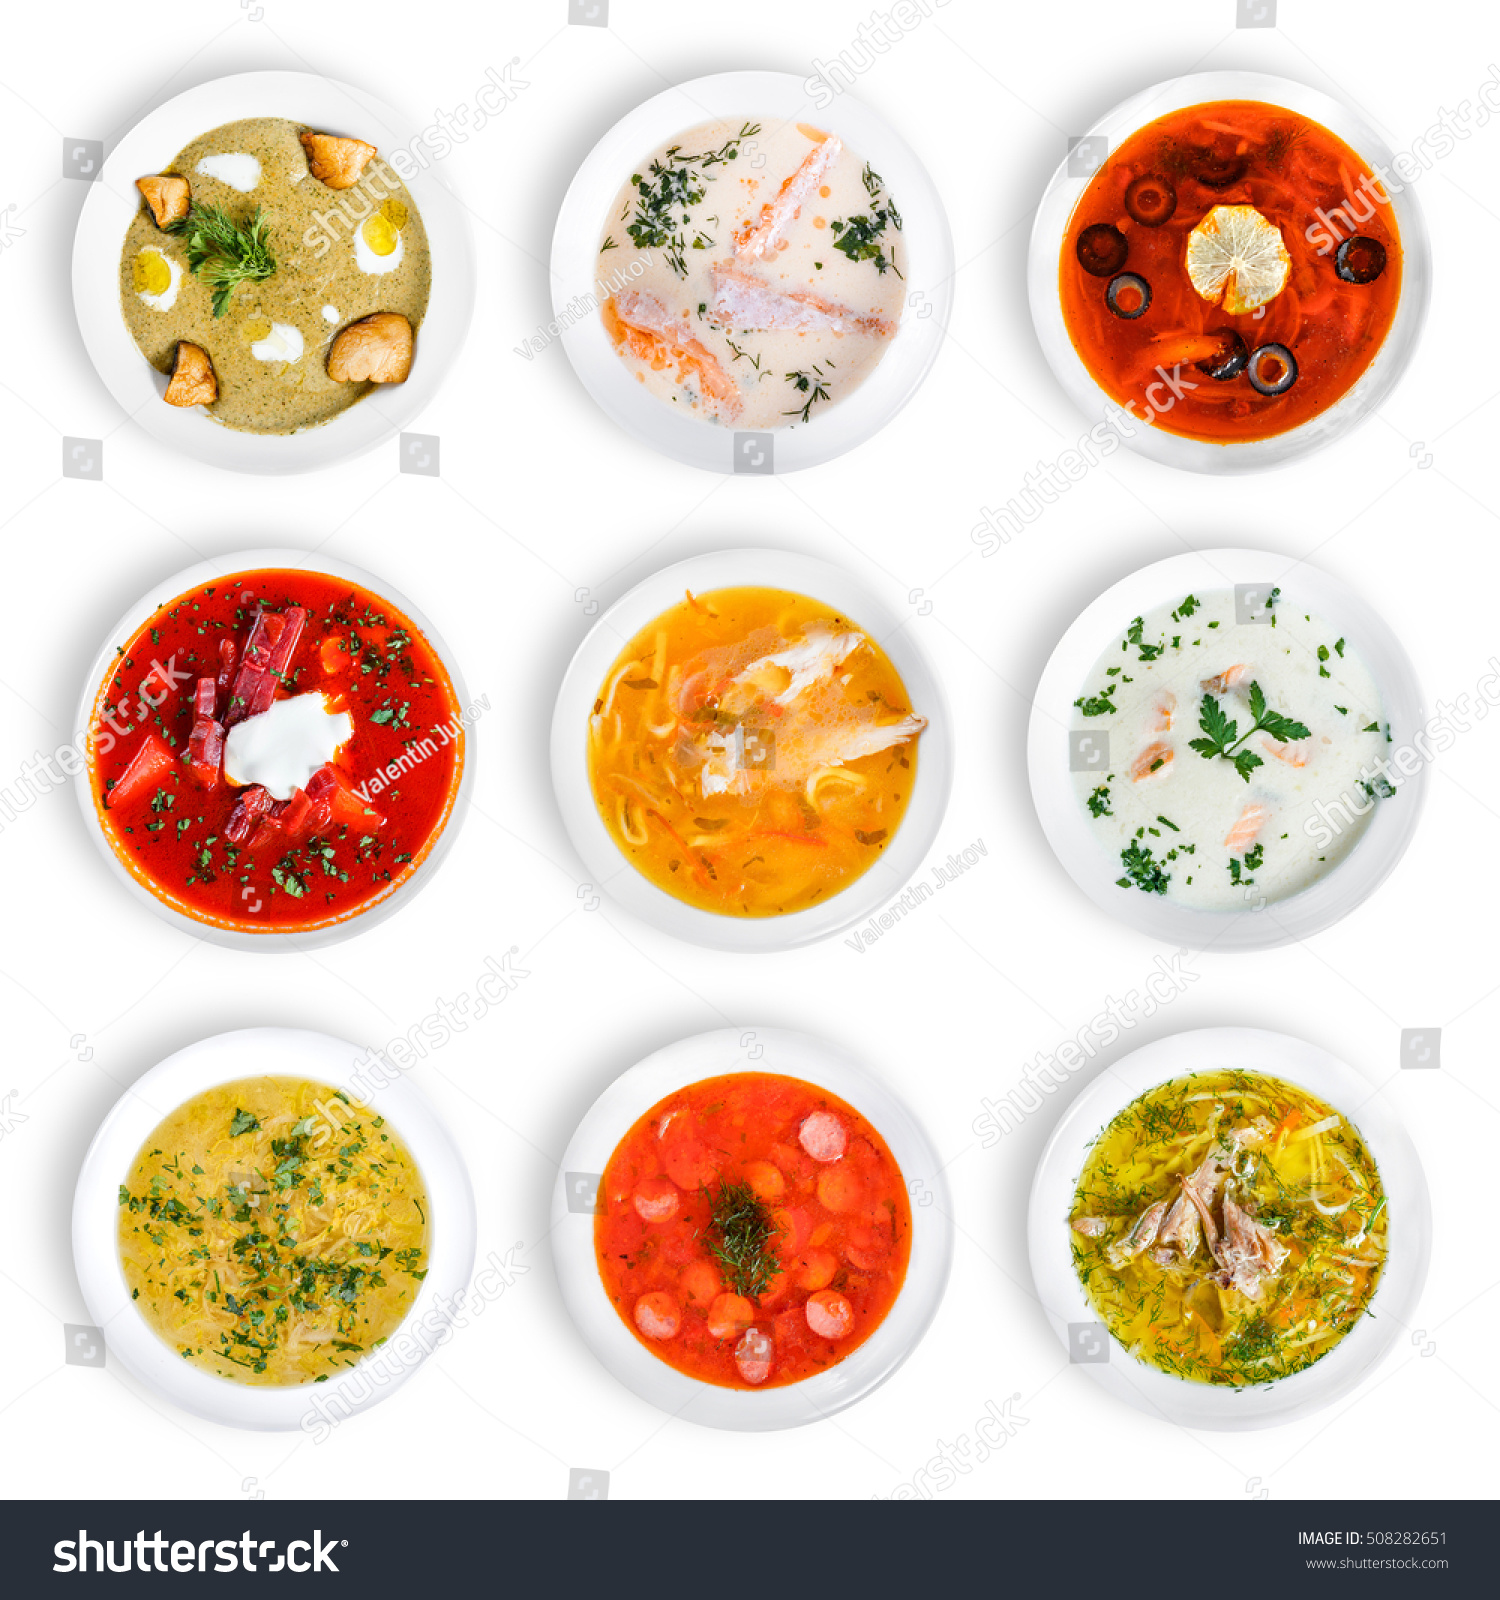 Big set of soups from worldwide cuisines, healthy food. Cream soup with mushrooms, asian fish soup, soup with meat - solyanka, russian borscht, chicken soup, isolated on white. Top view, flat lay #508282651